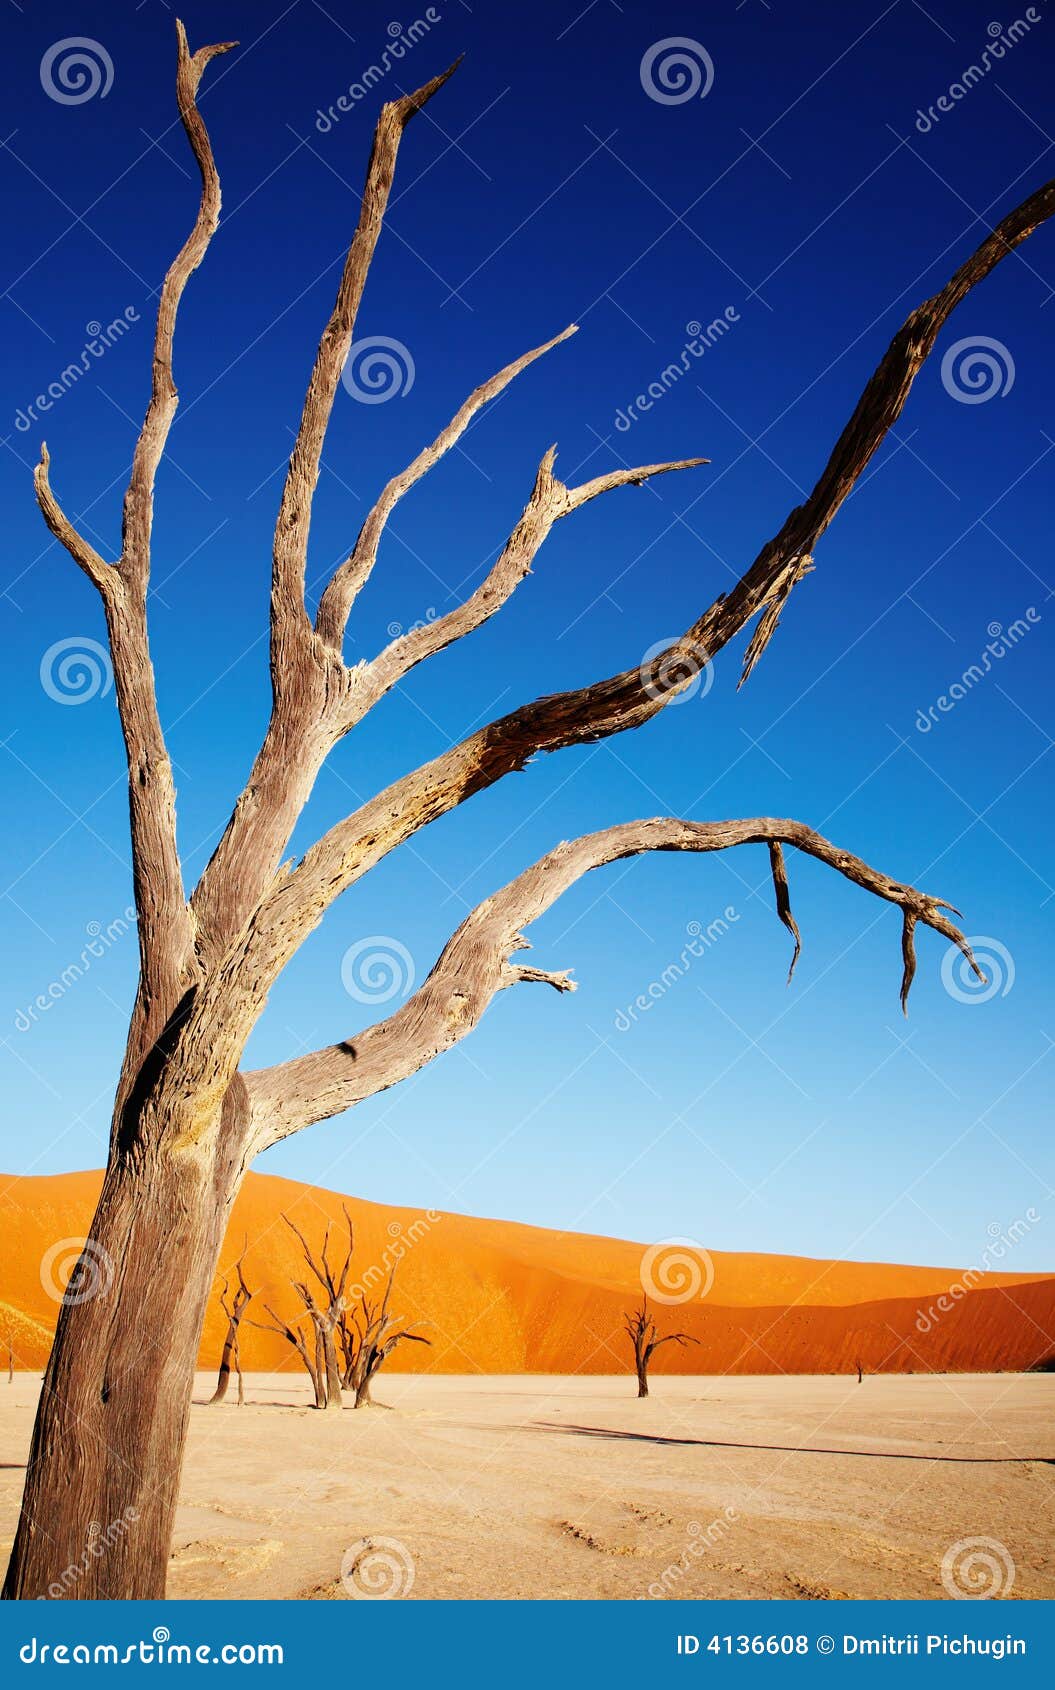 Moon Landscape In Namibia Africa Trees Lake